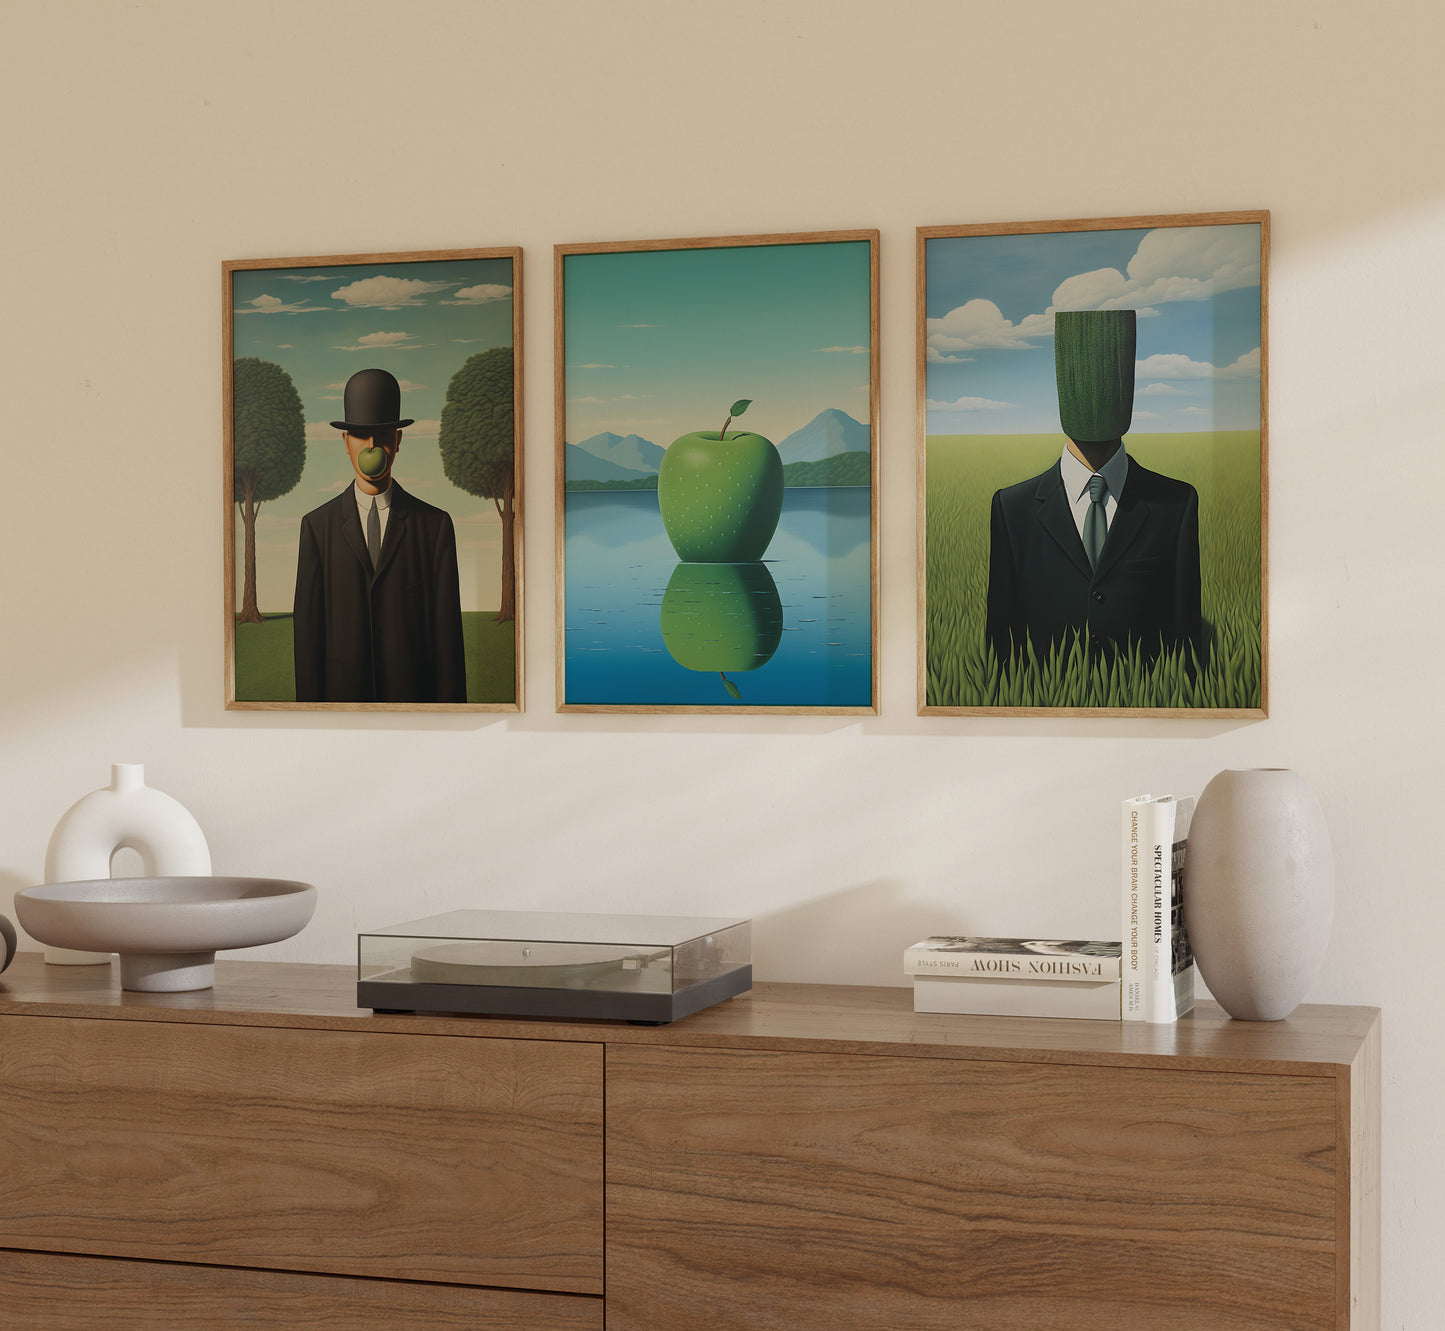 Three framed pictures in a minimalist room, depicting a man with an apple in front of his face.